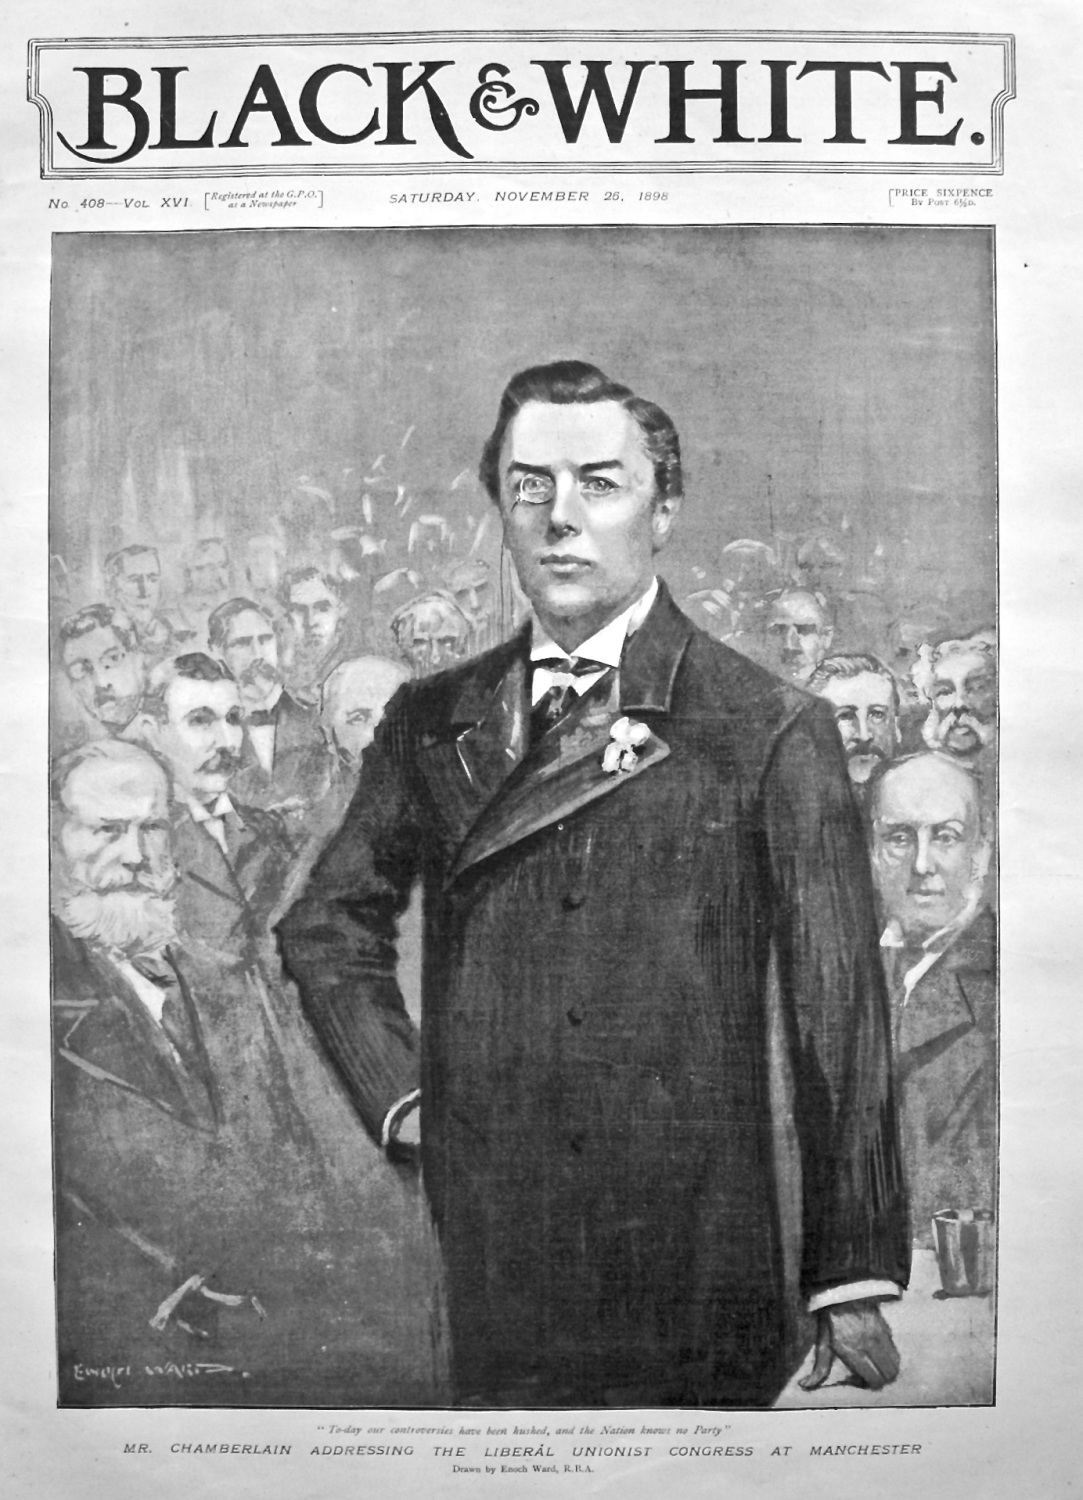 Mr. Chamberlain Addressing the Liberal Unionist Congress at Manchester. 189